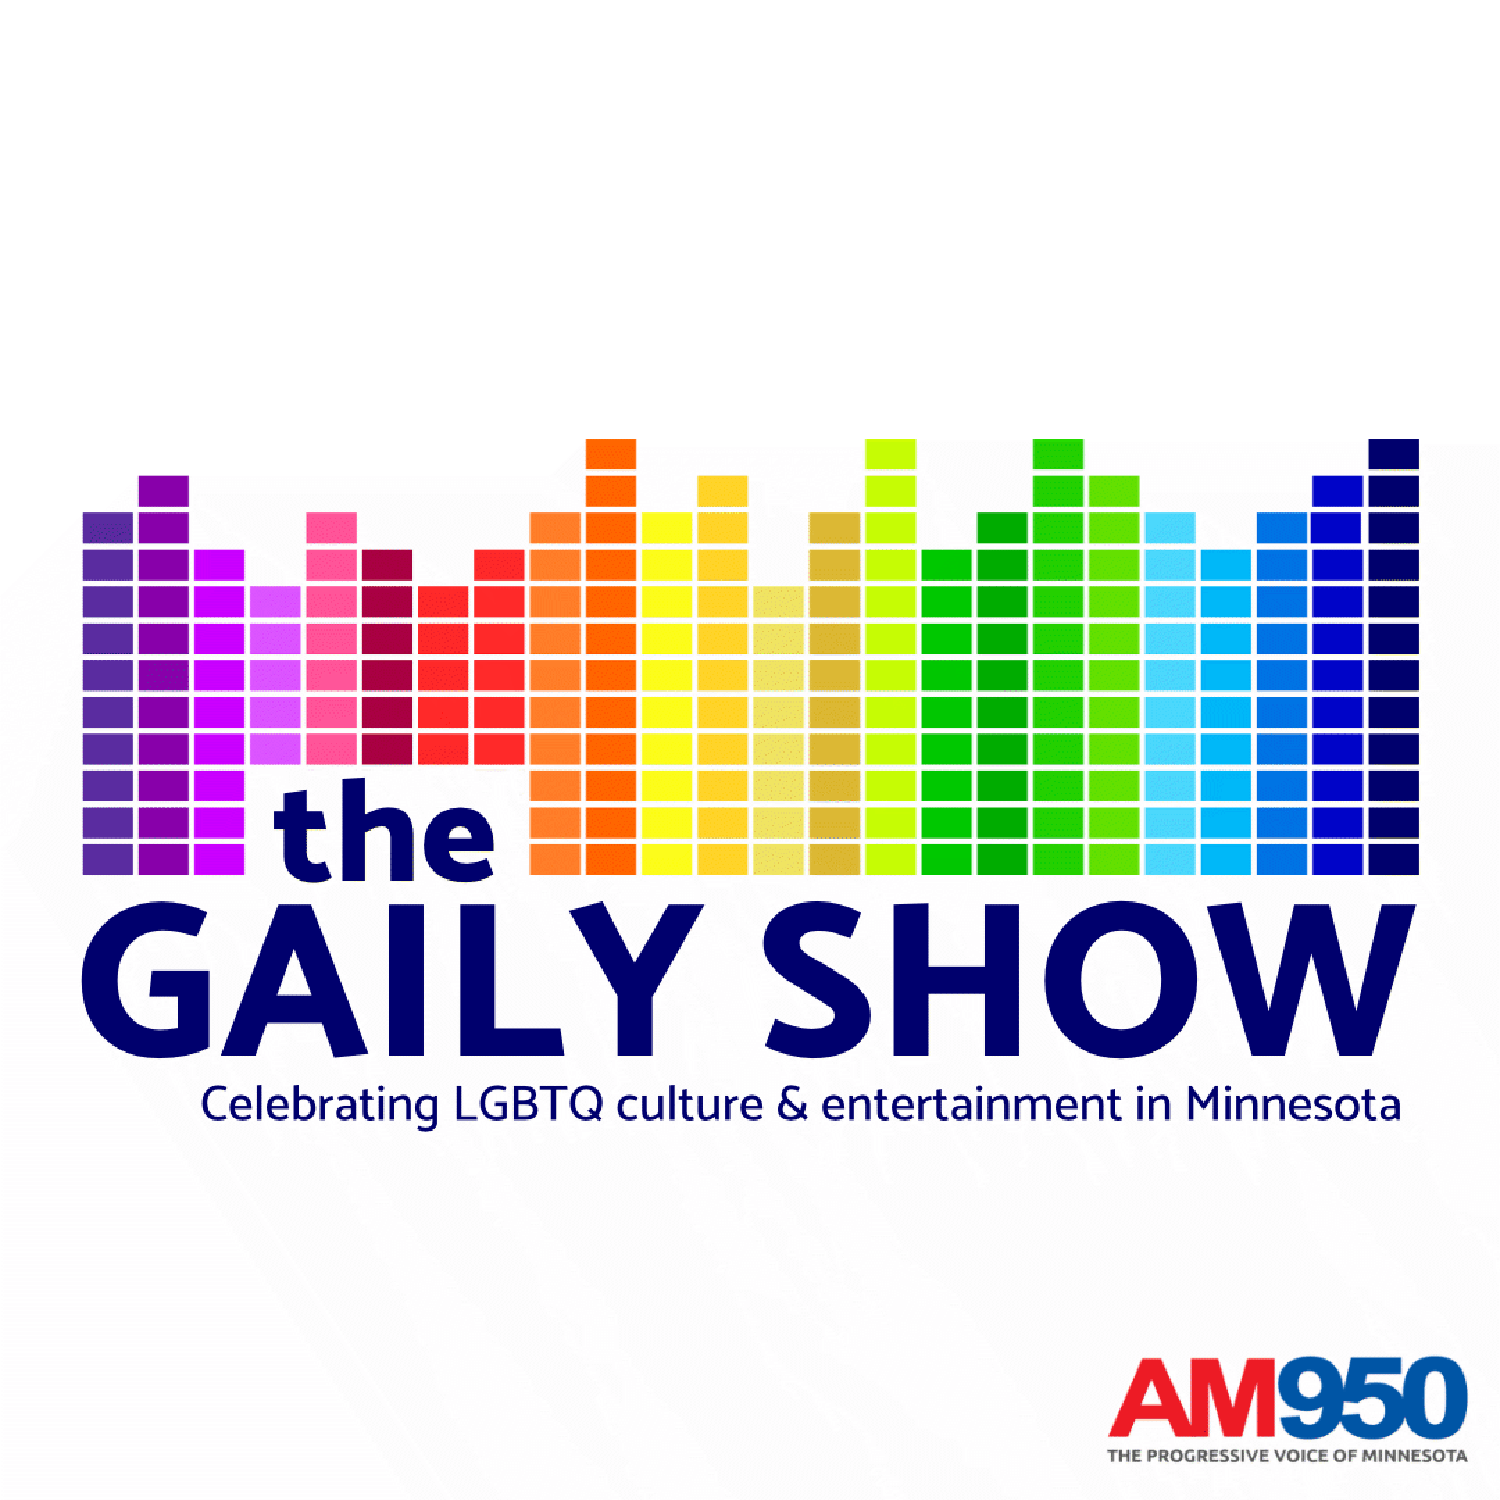 The Gaily Show